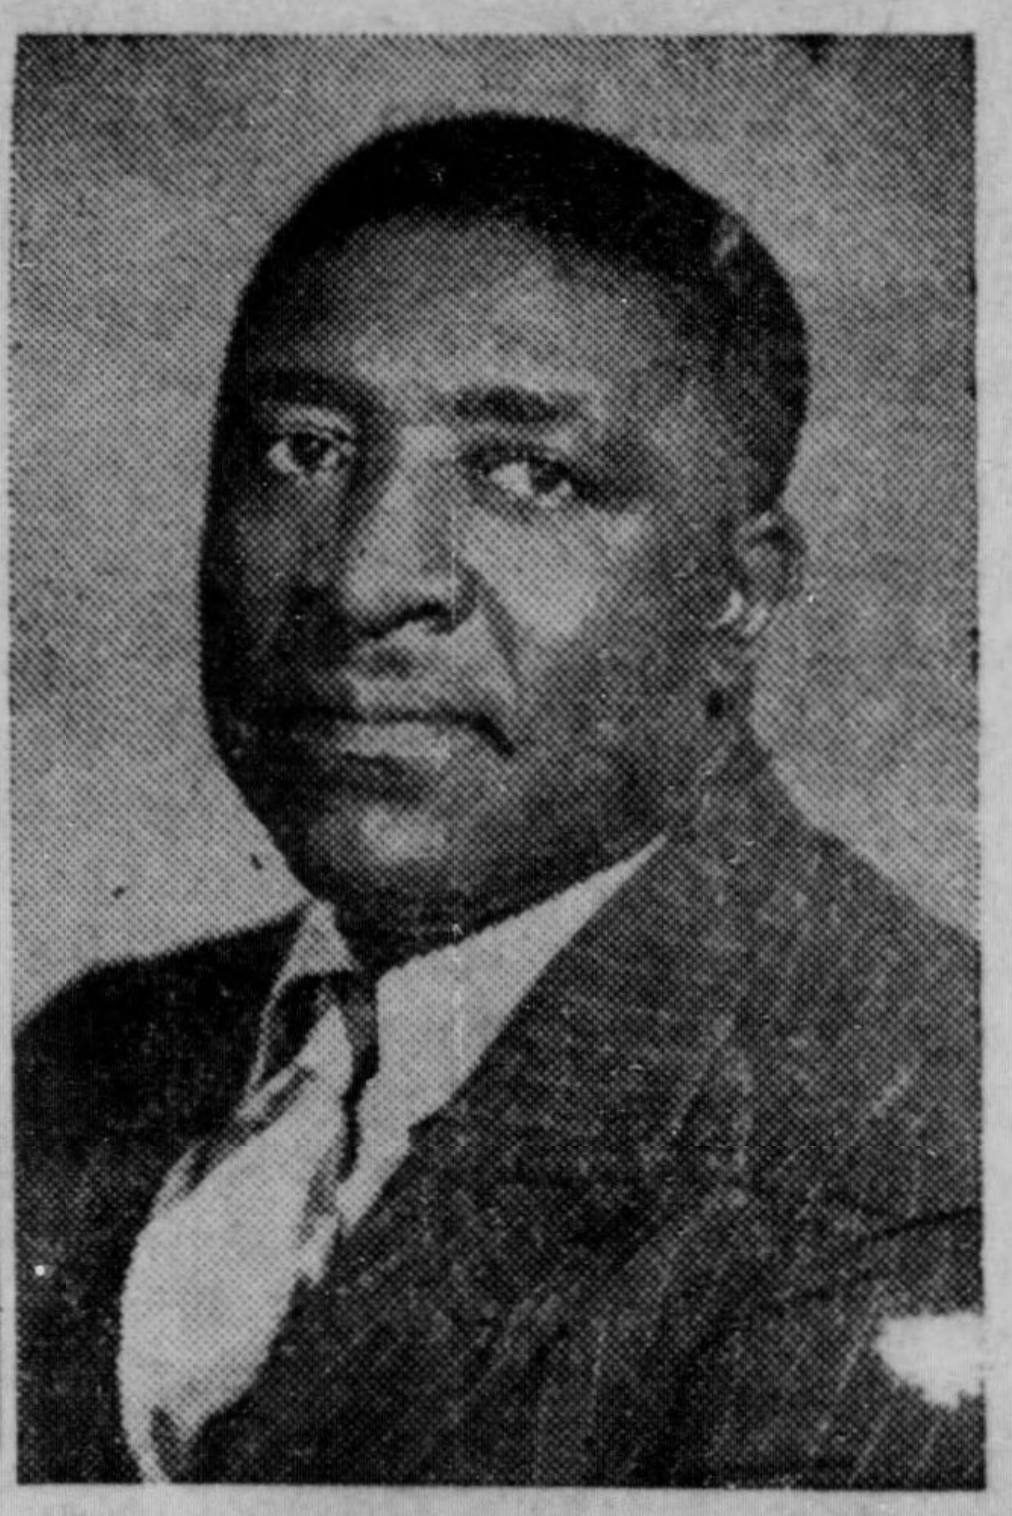 This is Rev. S.S. Spaght (1889-1959), founding minister of the North 24th Street Church of God in North Omaha.